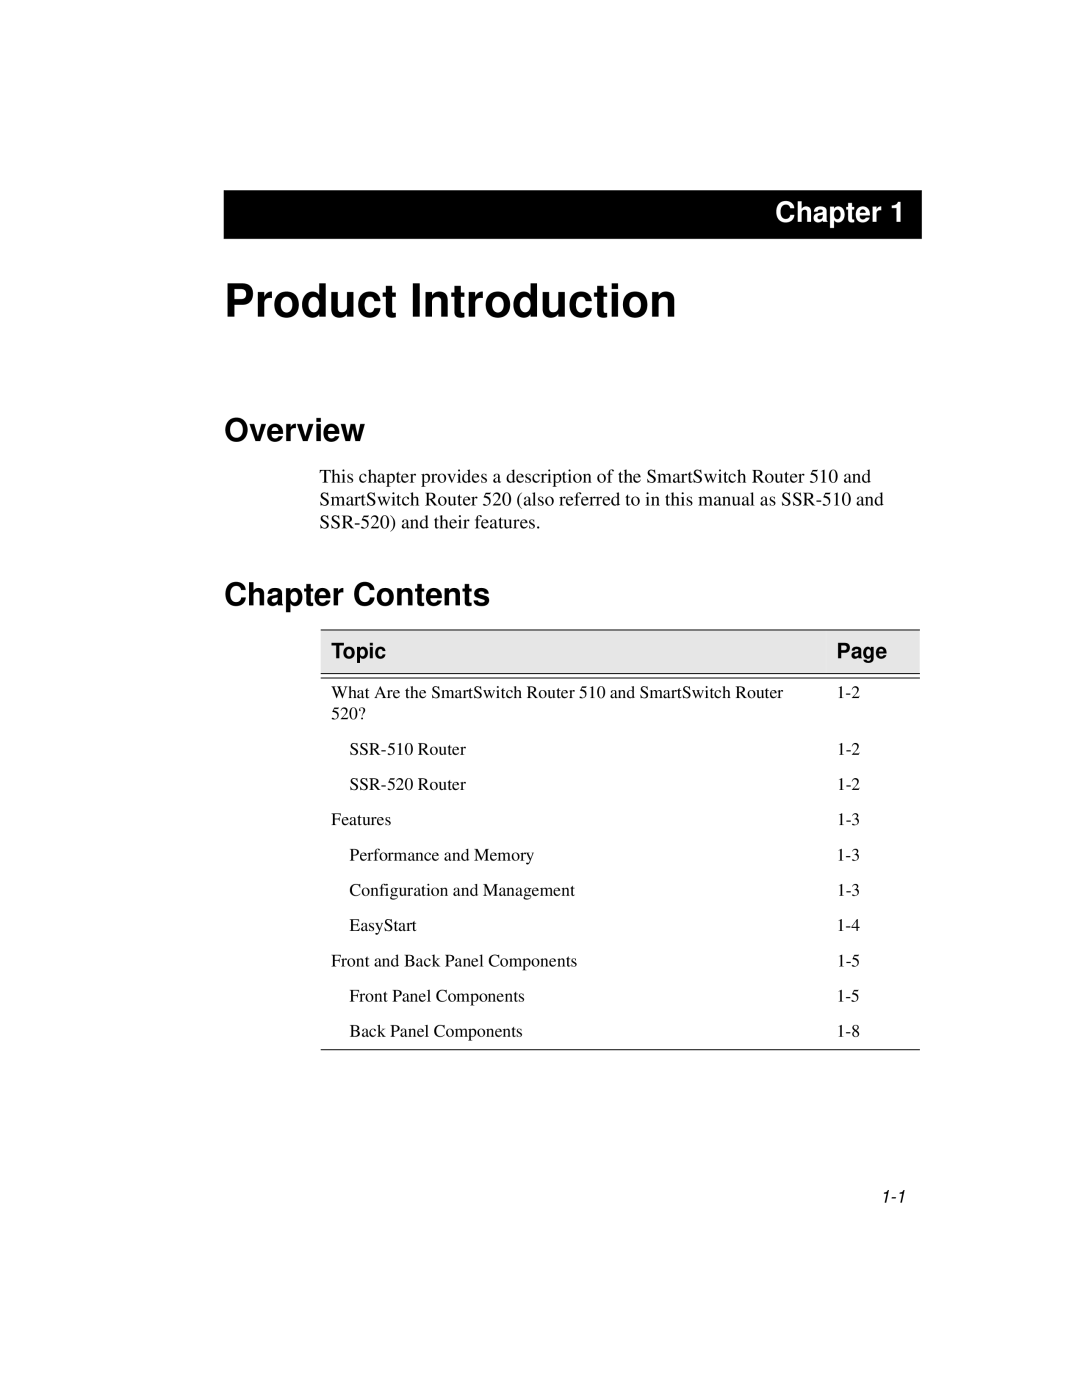 Cabletron Systems 520, 510 manual Product Introduction, Chapter Contents 